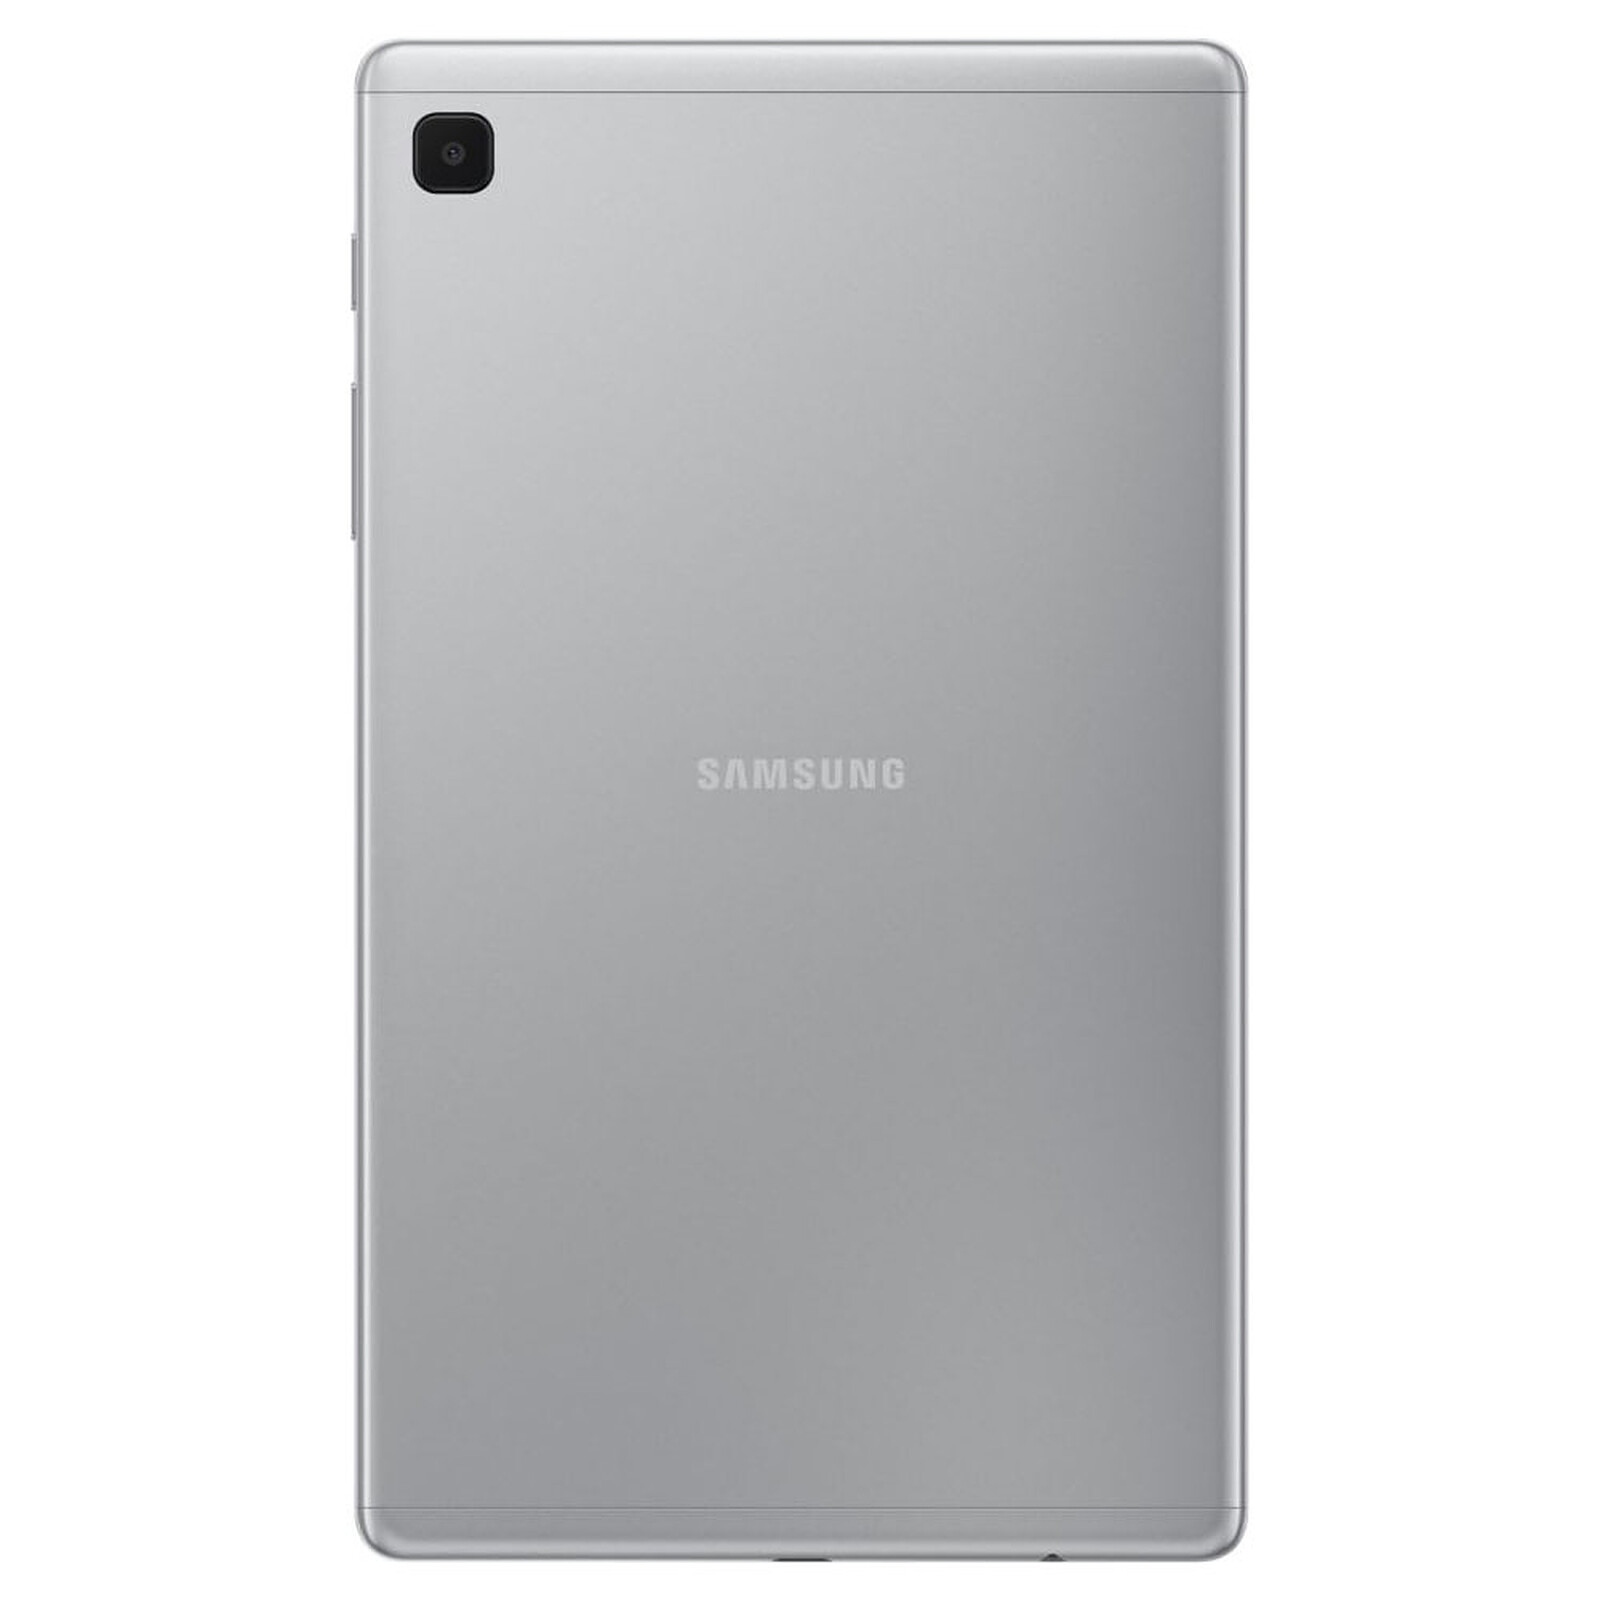 Samsung Galaxy Tab A7 SM T220 Wi Fi Tablet 8.7 Touchscreen 32GB Storage  Android Q GreyBlack - Office Depot